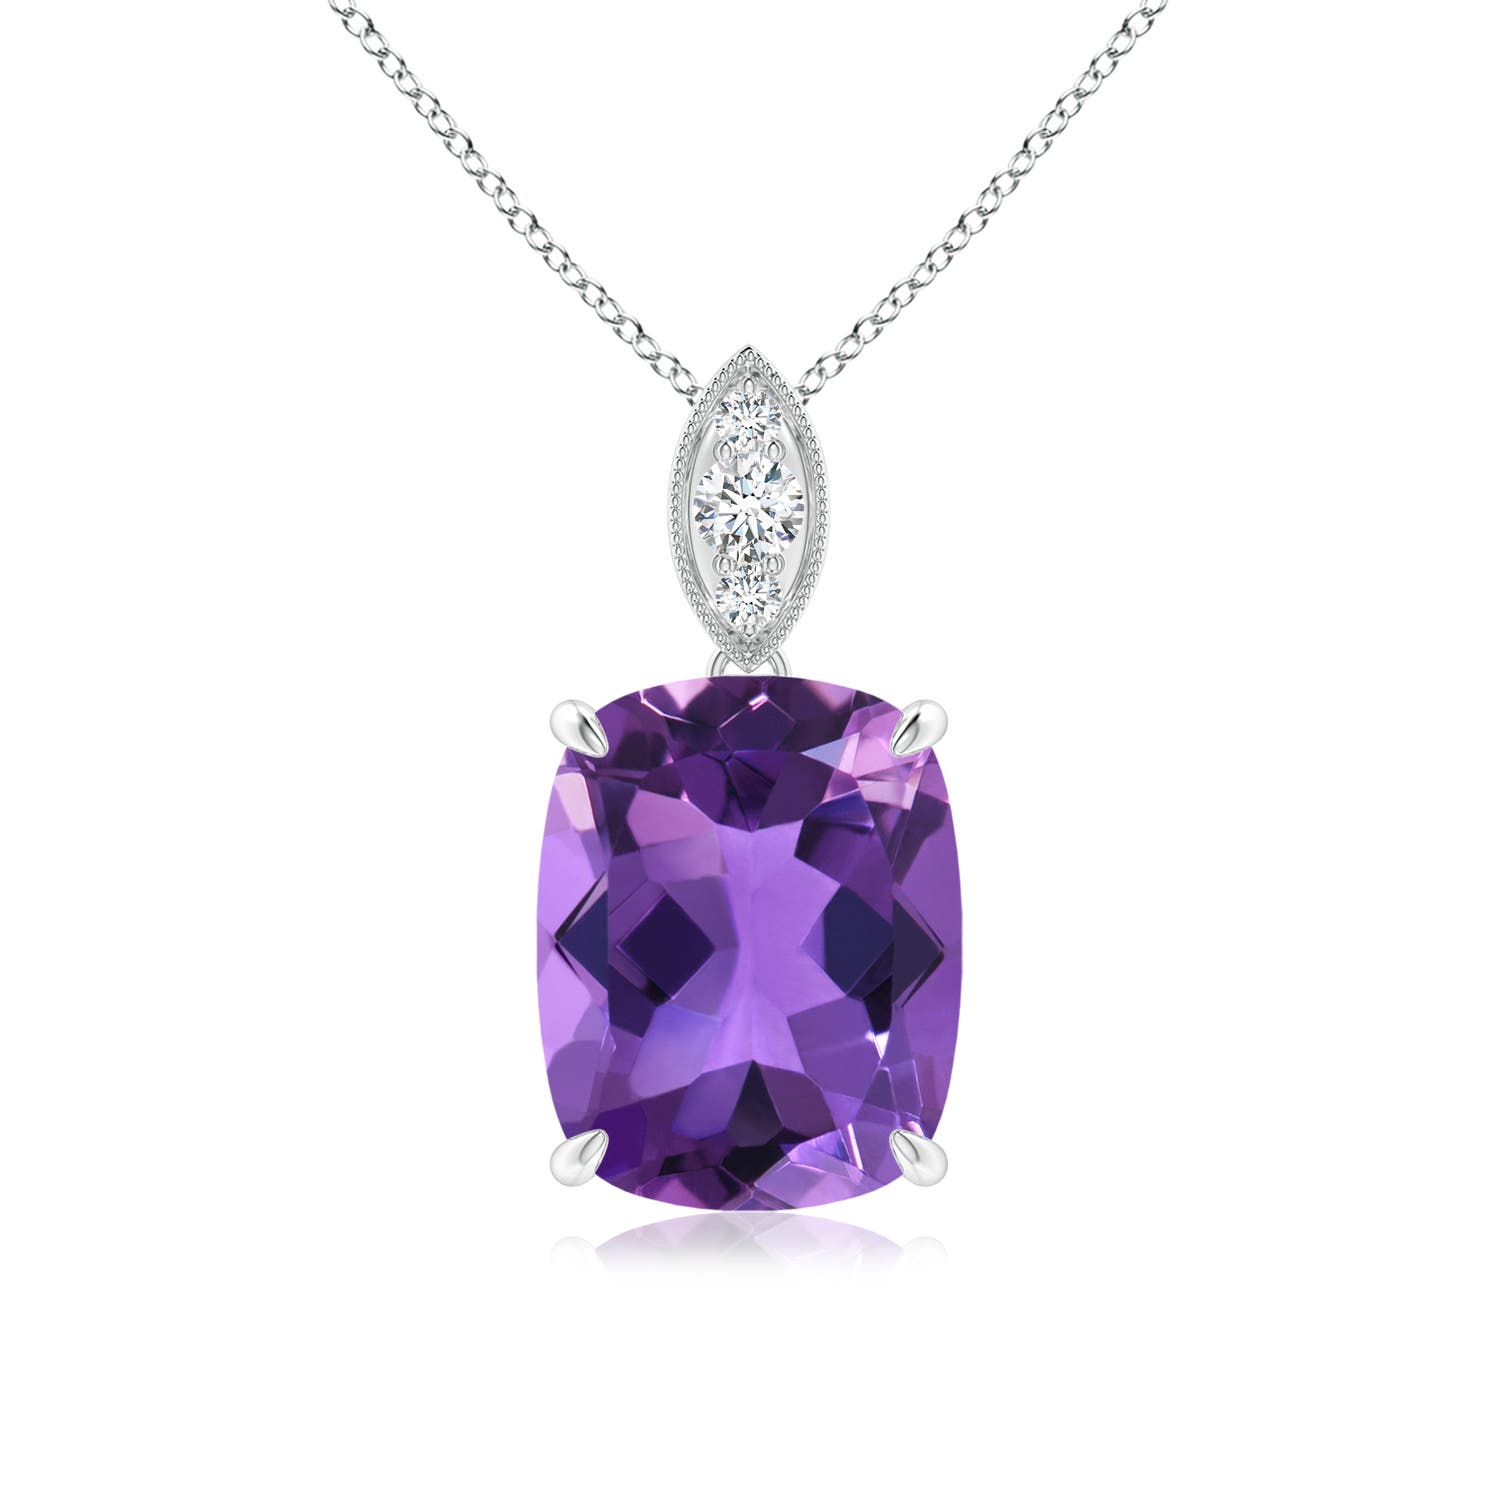 AAA - Amethyst / 2.75 CT / 14 KT White Gold